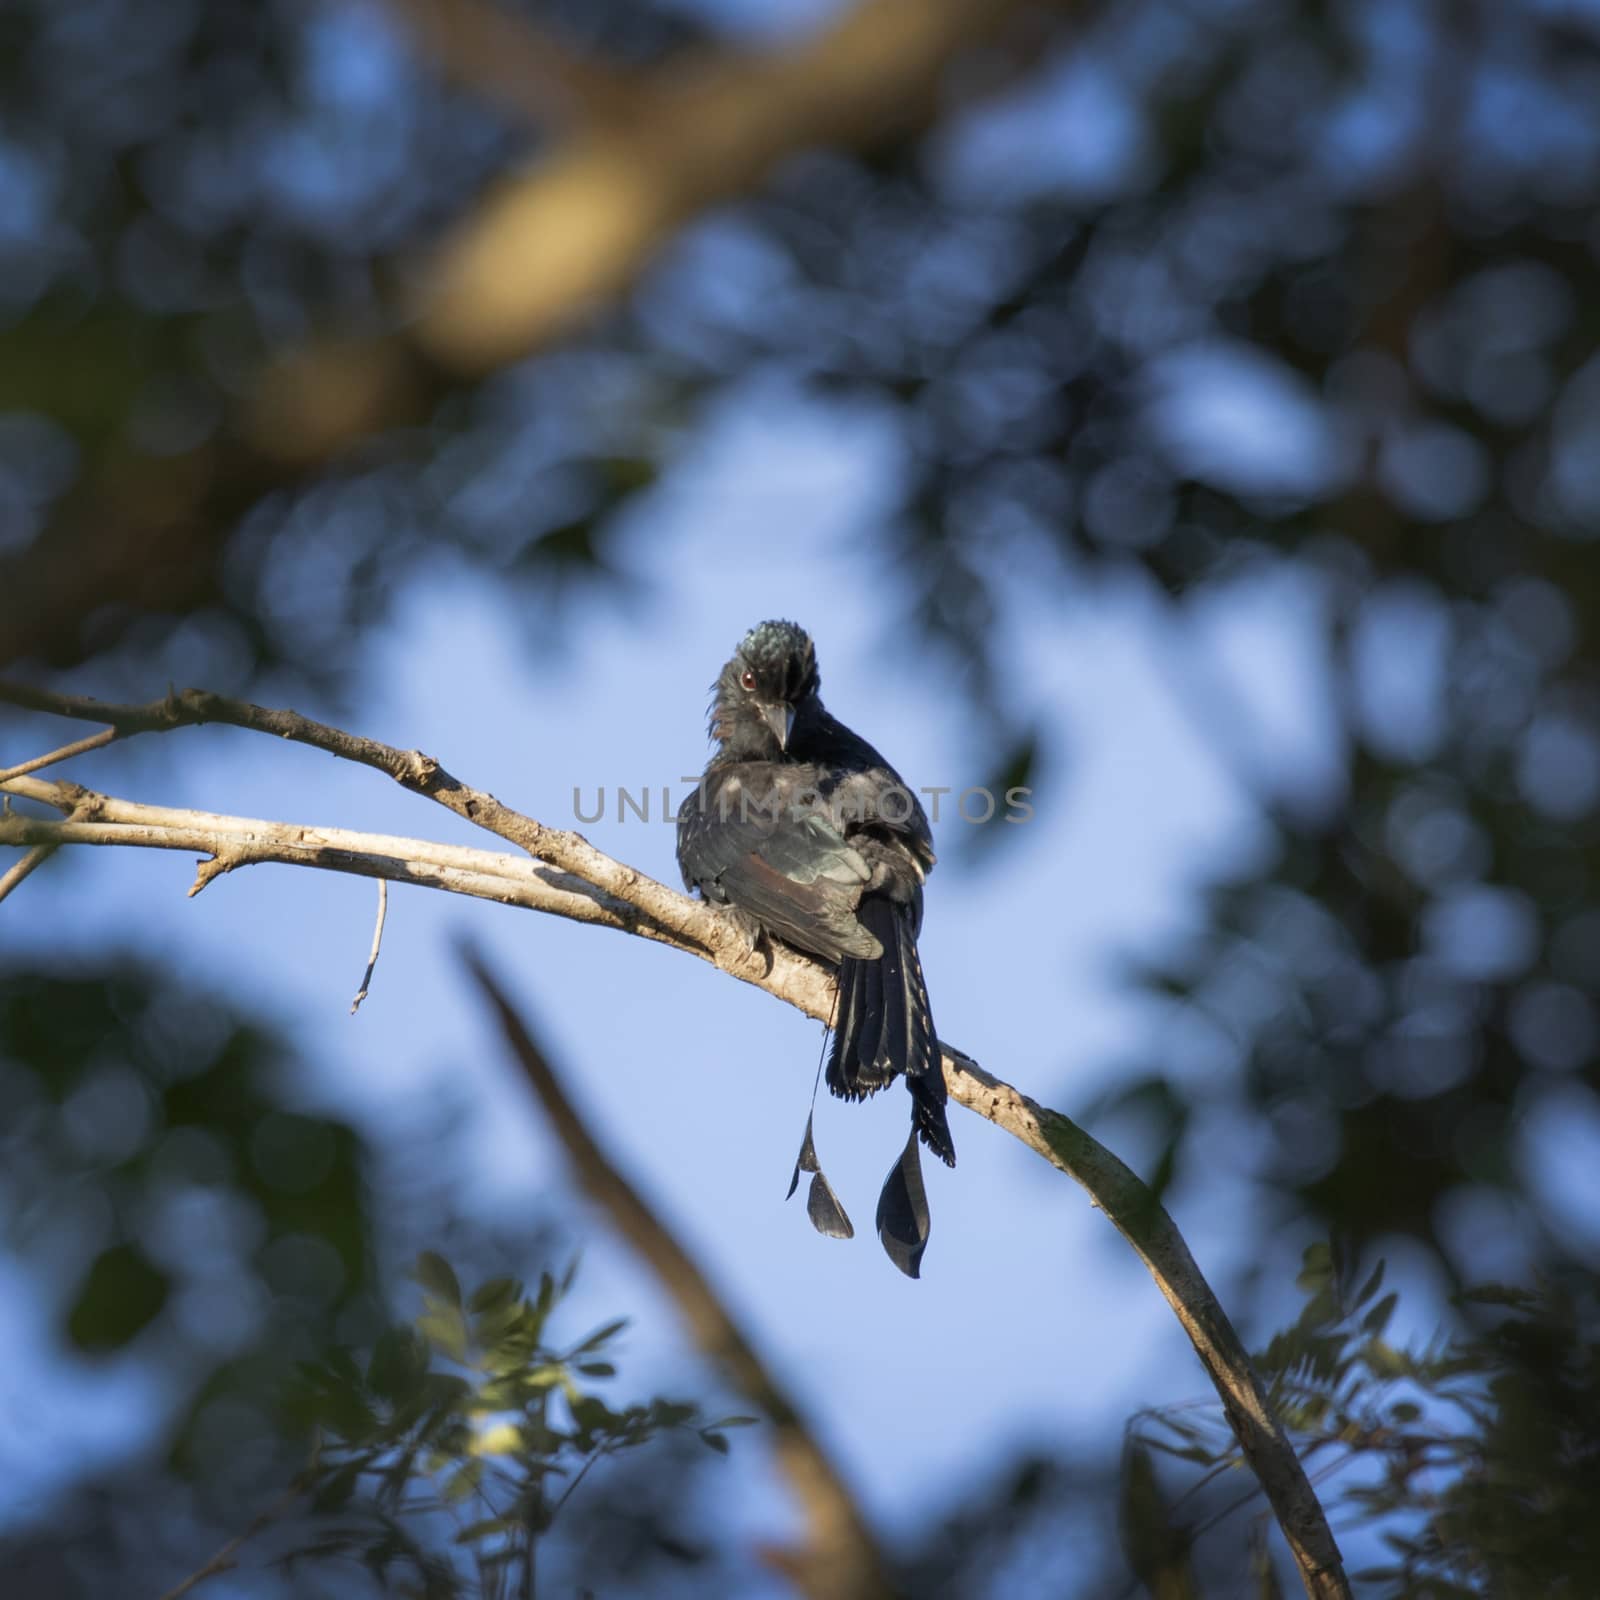 Image of Greater Racket-tailed Drongo perched on tree branch. in forest, Thailand.